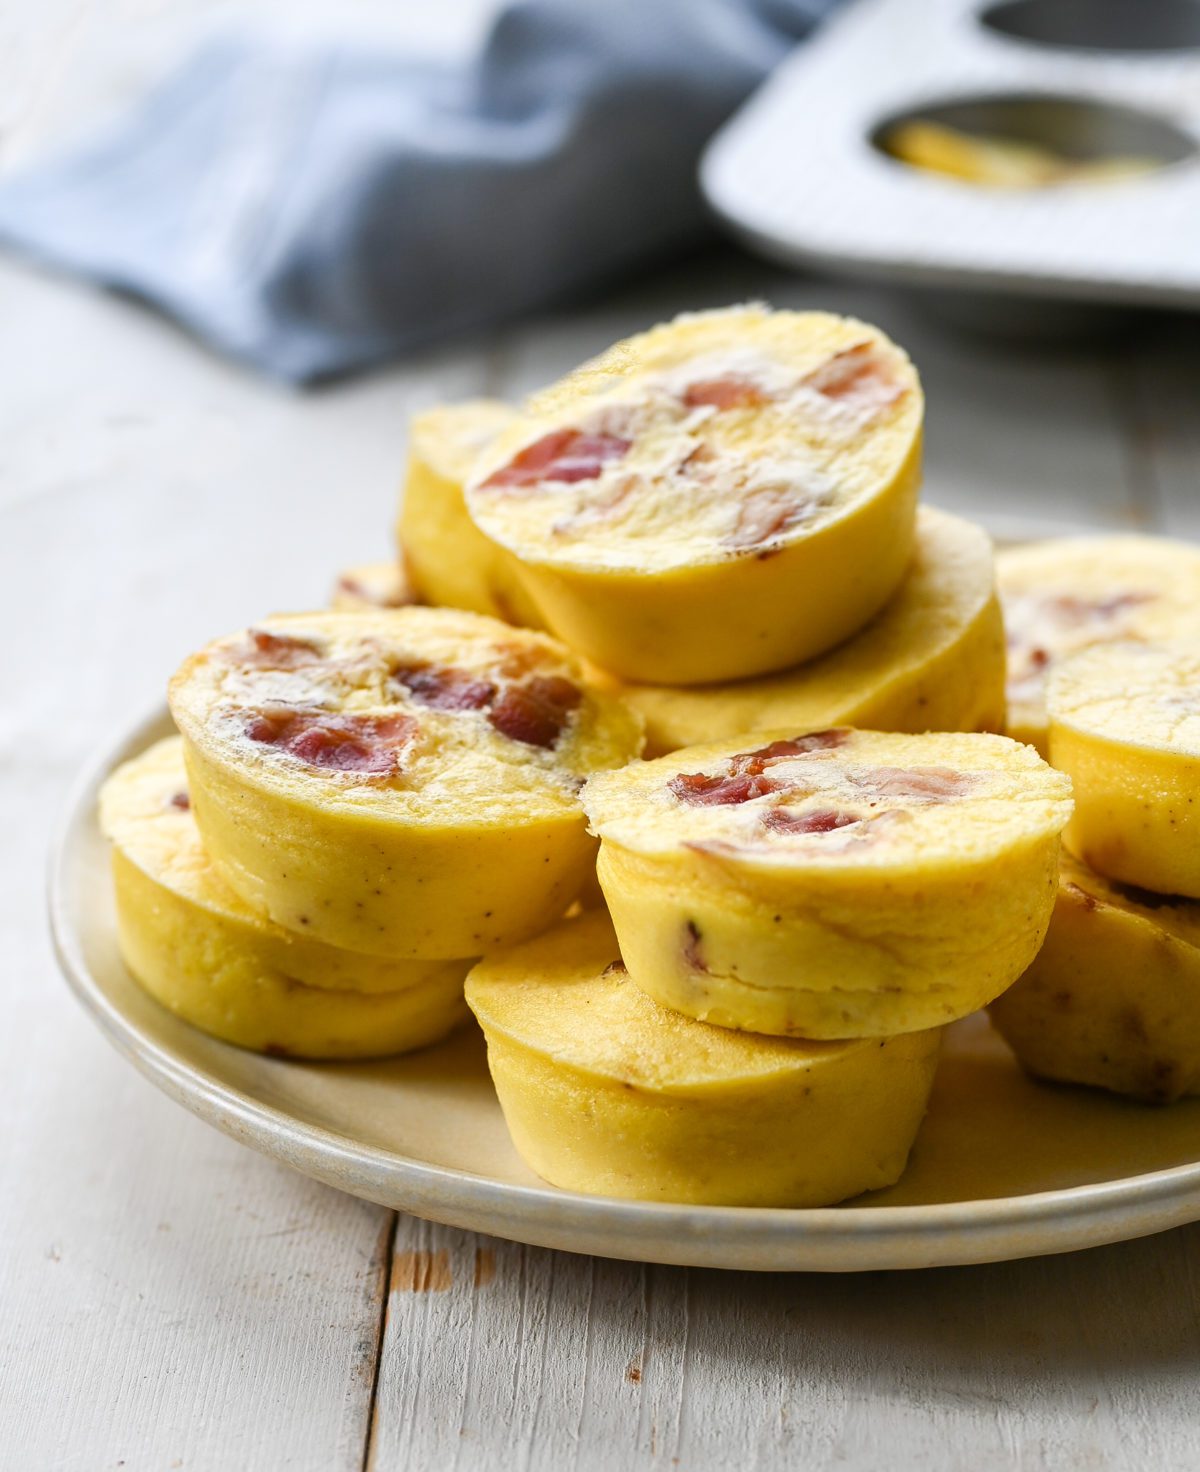 Bacon and Red Pepper Egg Bites with the easiest egg bite recipe